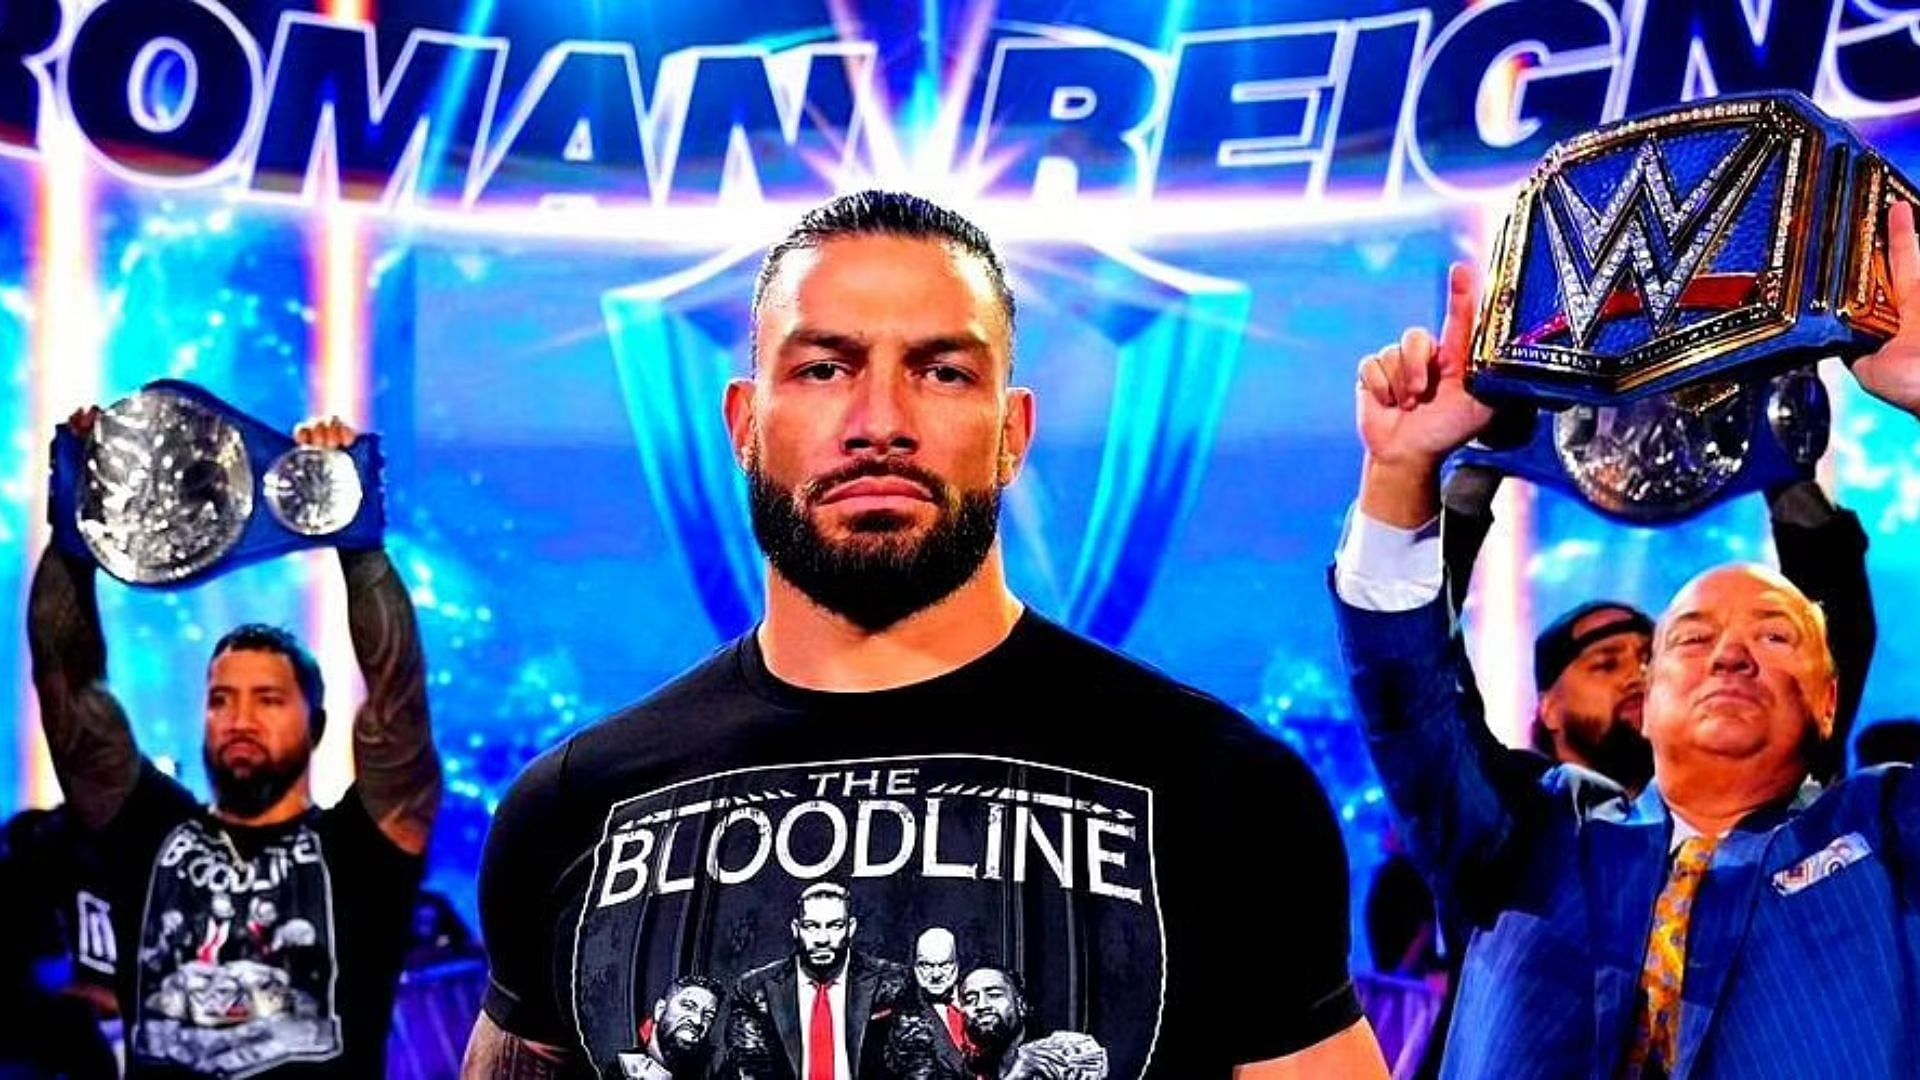 The Bloodline has been a dominant force in WWE over the last two years